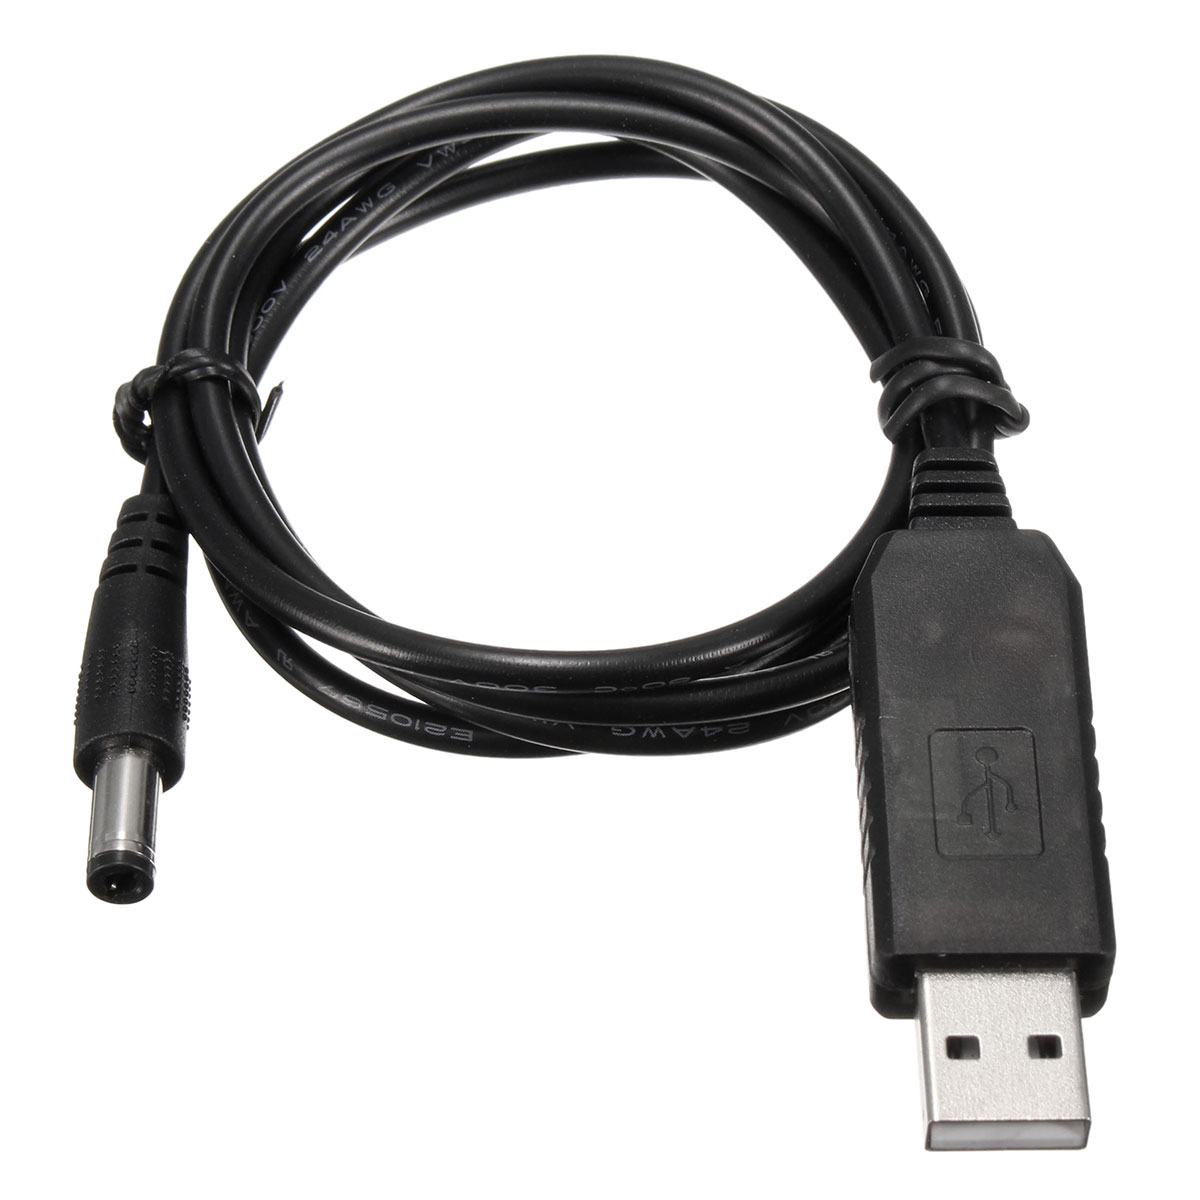 1m-5V-DC-To-12V-DC-USB-Power-Cable-Data-Adapter-Charger-Plug-with-LED-21mm-x-55mm-1052777